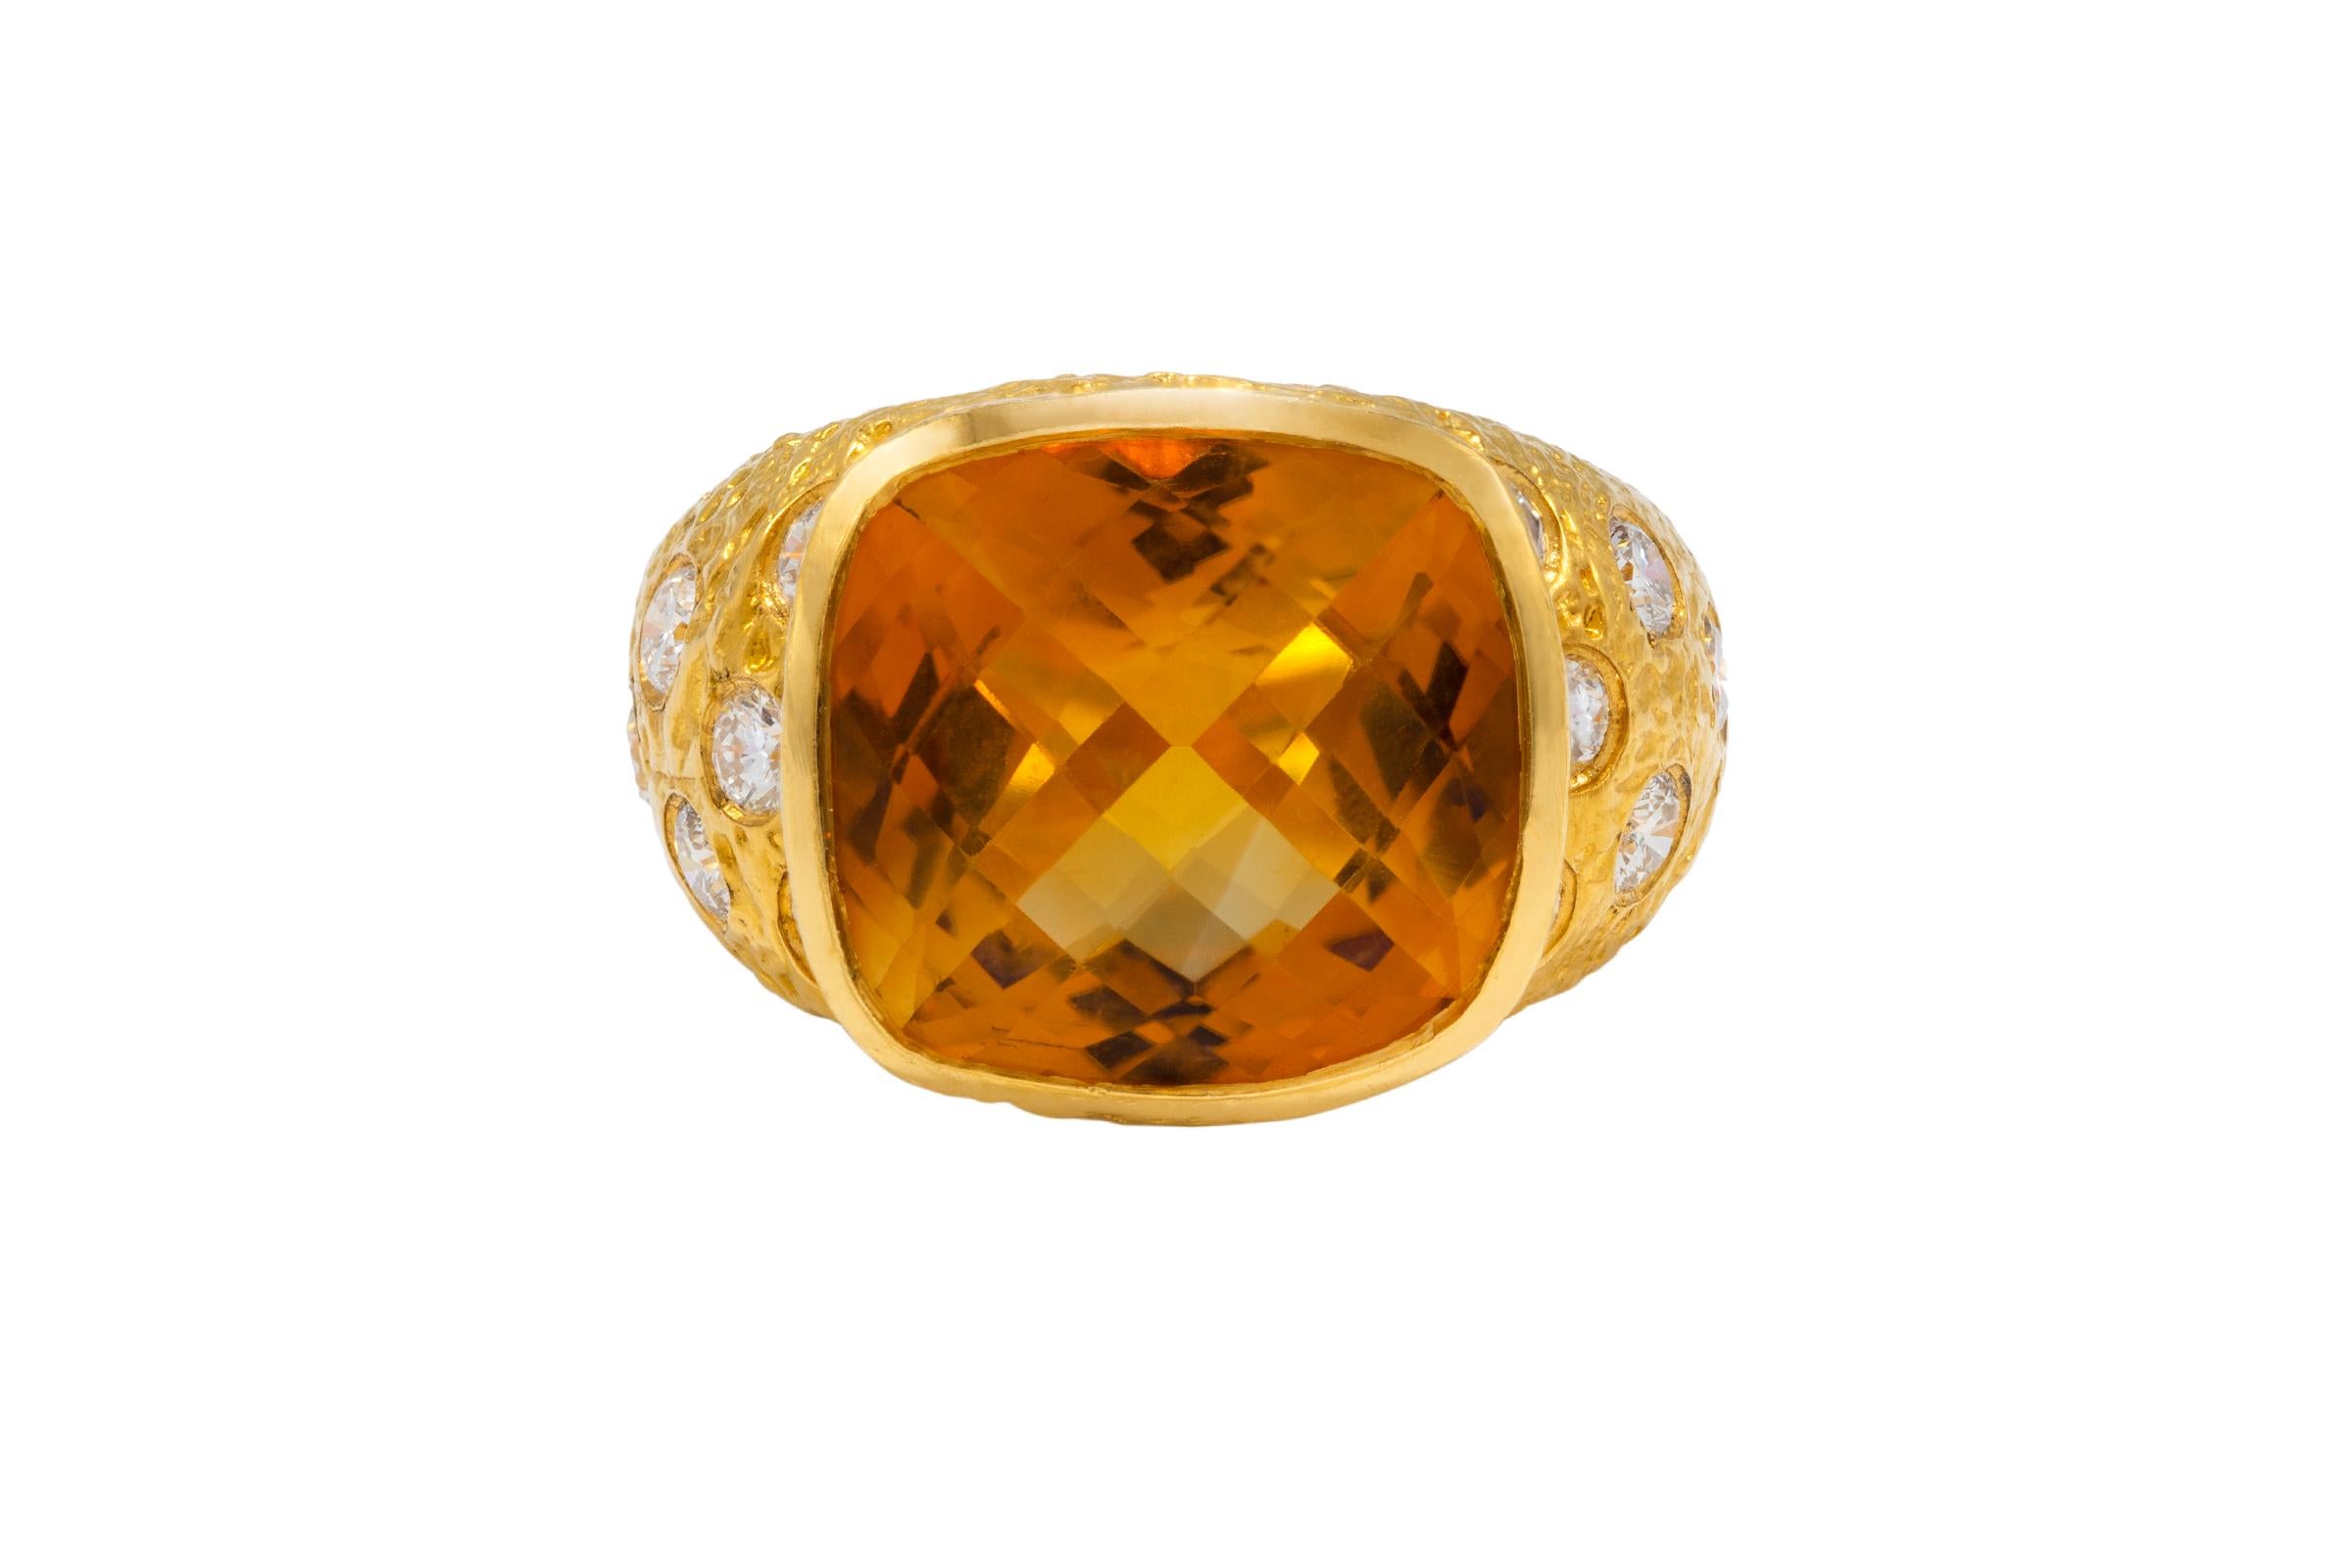 This 22k Gold Citrine Birthstone Cocktail Ring is a stunner! Features a central Citrine set in a bezel that sits a top a classic dome ring with scattered diamonds throughout dome of ring. The different heights, stones and texture makes it a truly